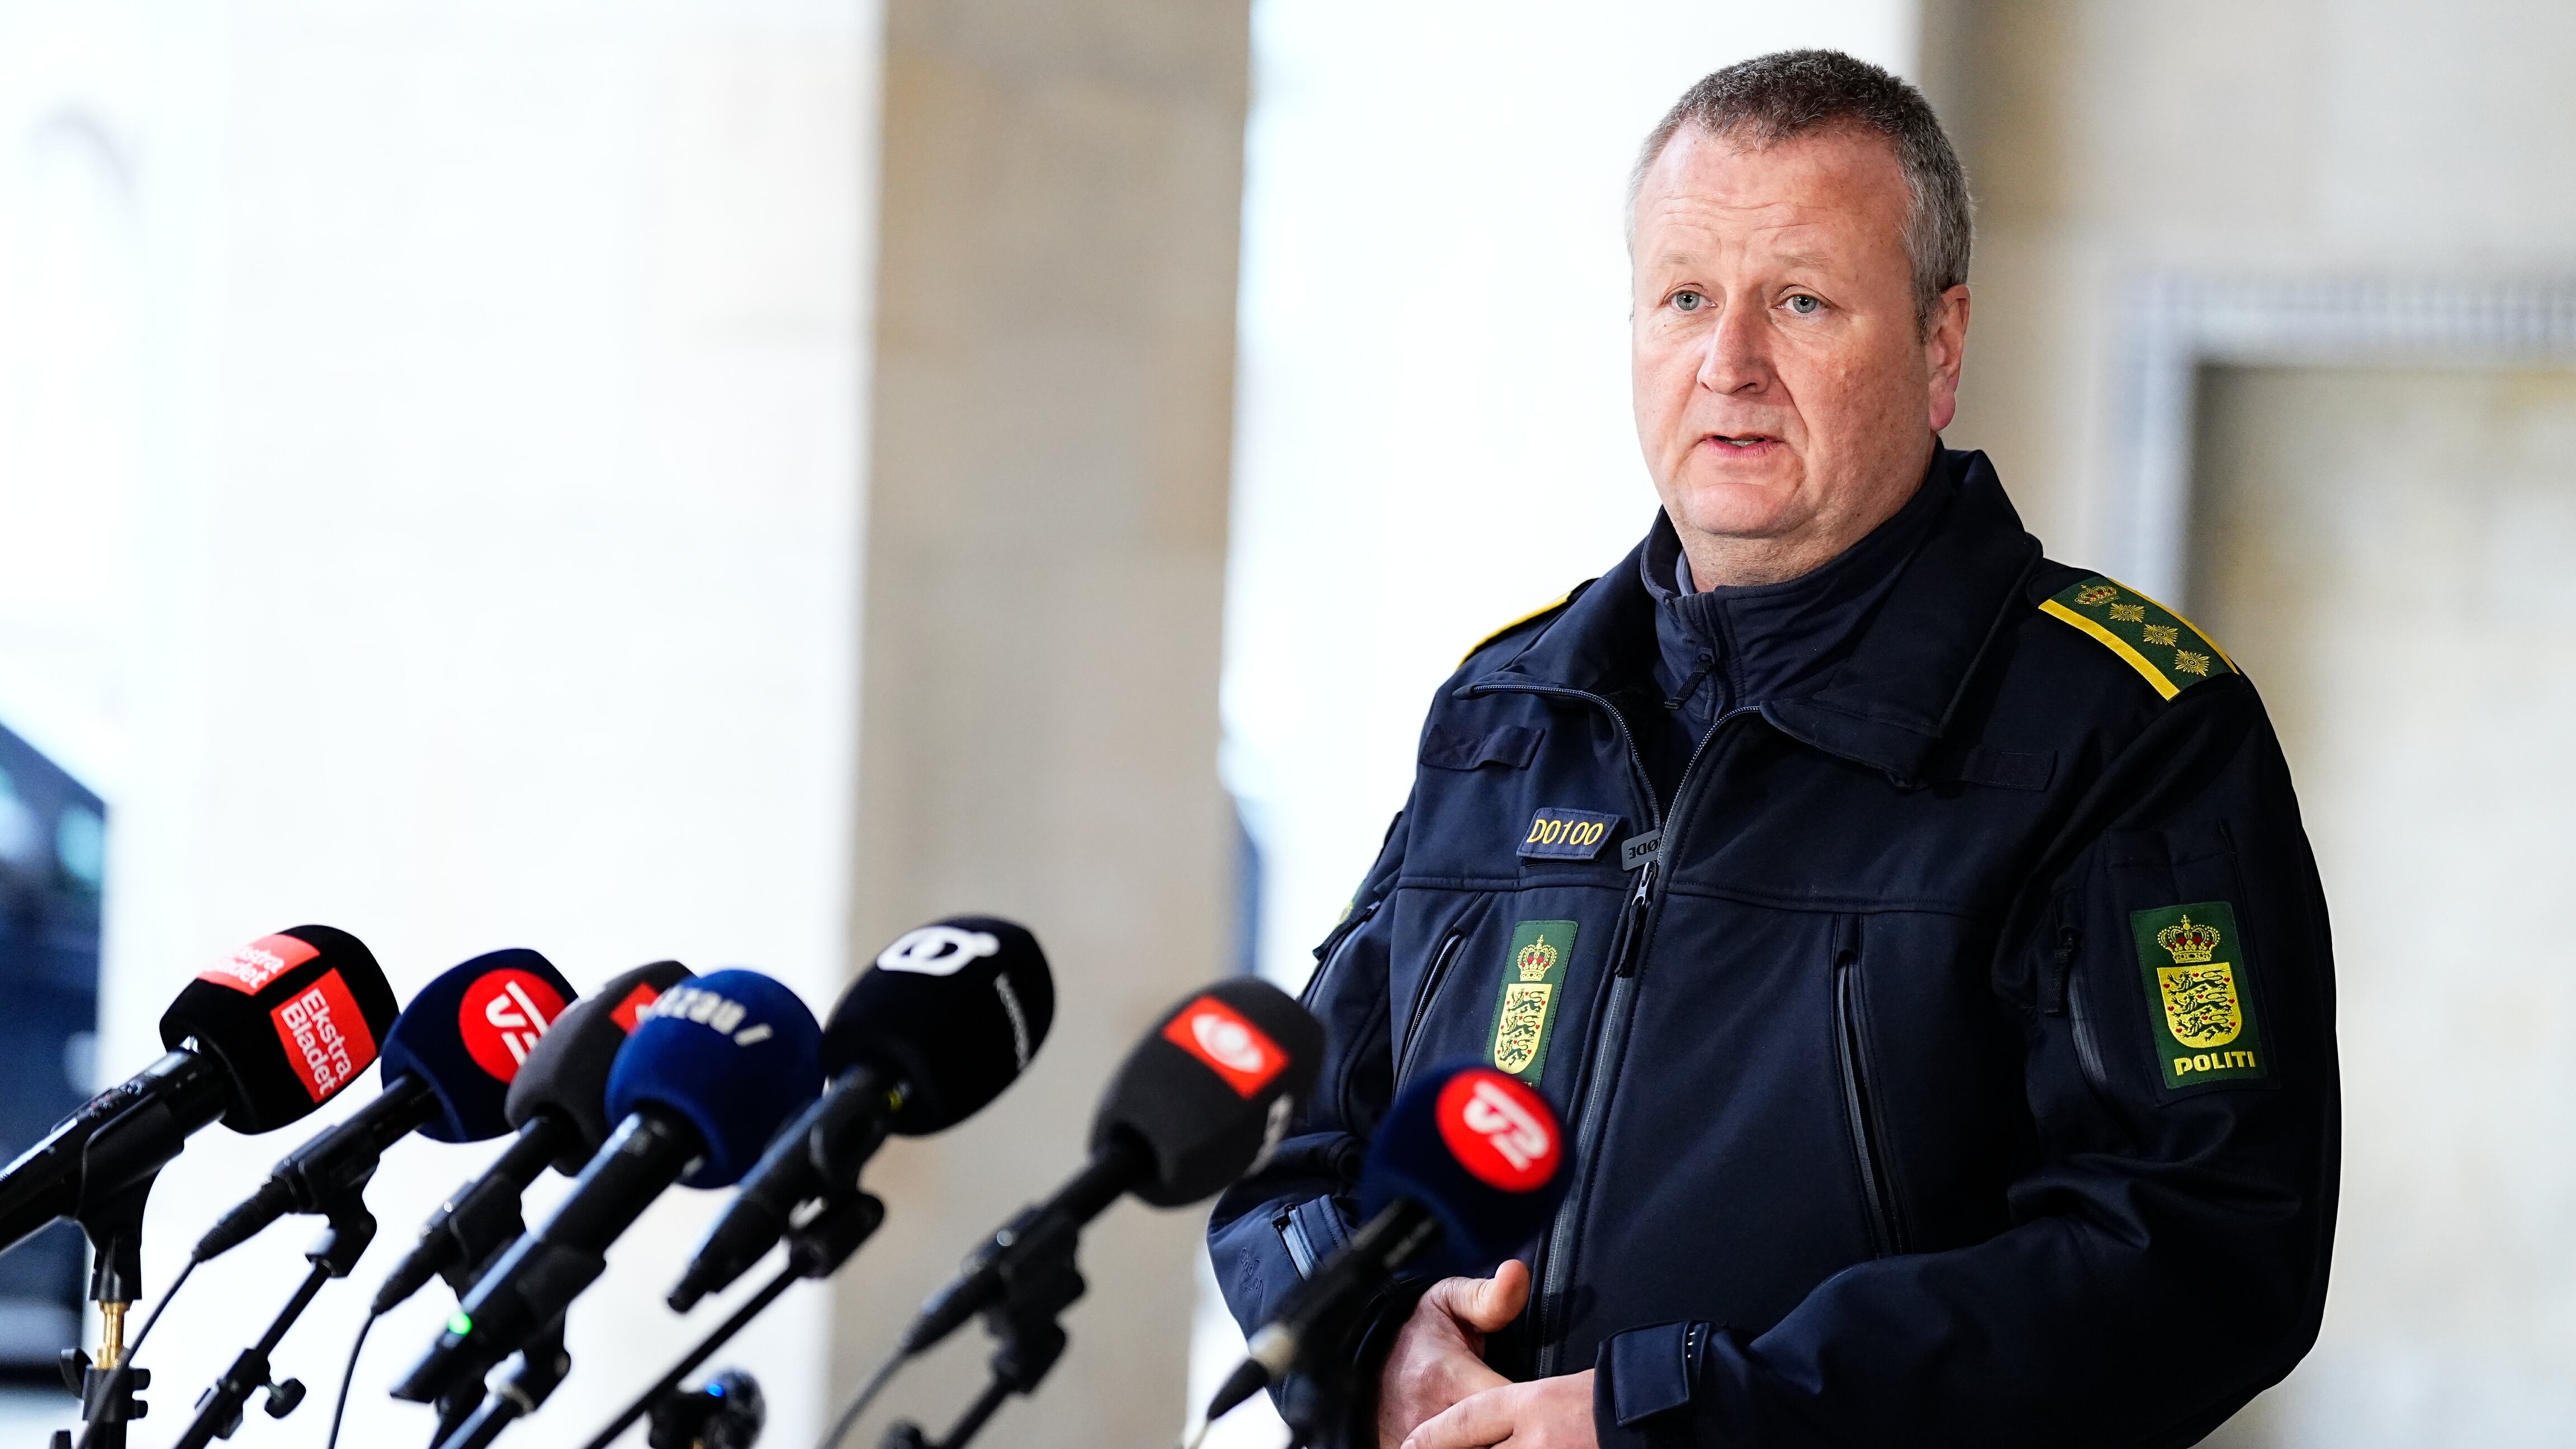 Denmark is holding two people in custody and four others are the target of a terrorism investigation, a prosecutor said (Emil Nicolai Helms/Ritzau Scanpix via AP)